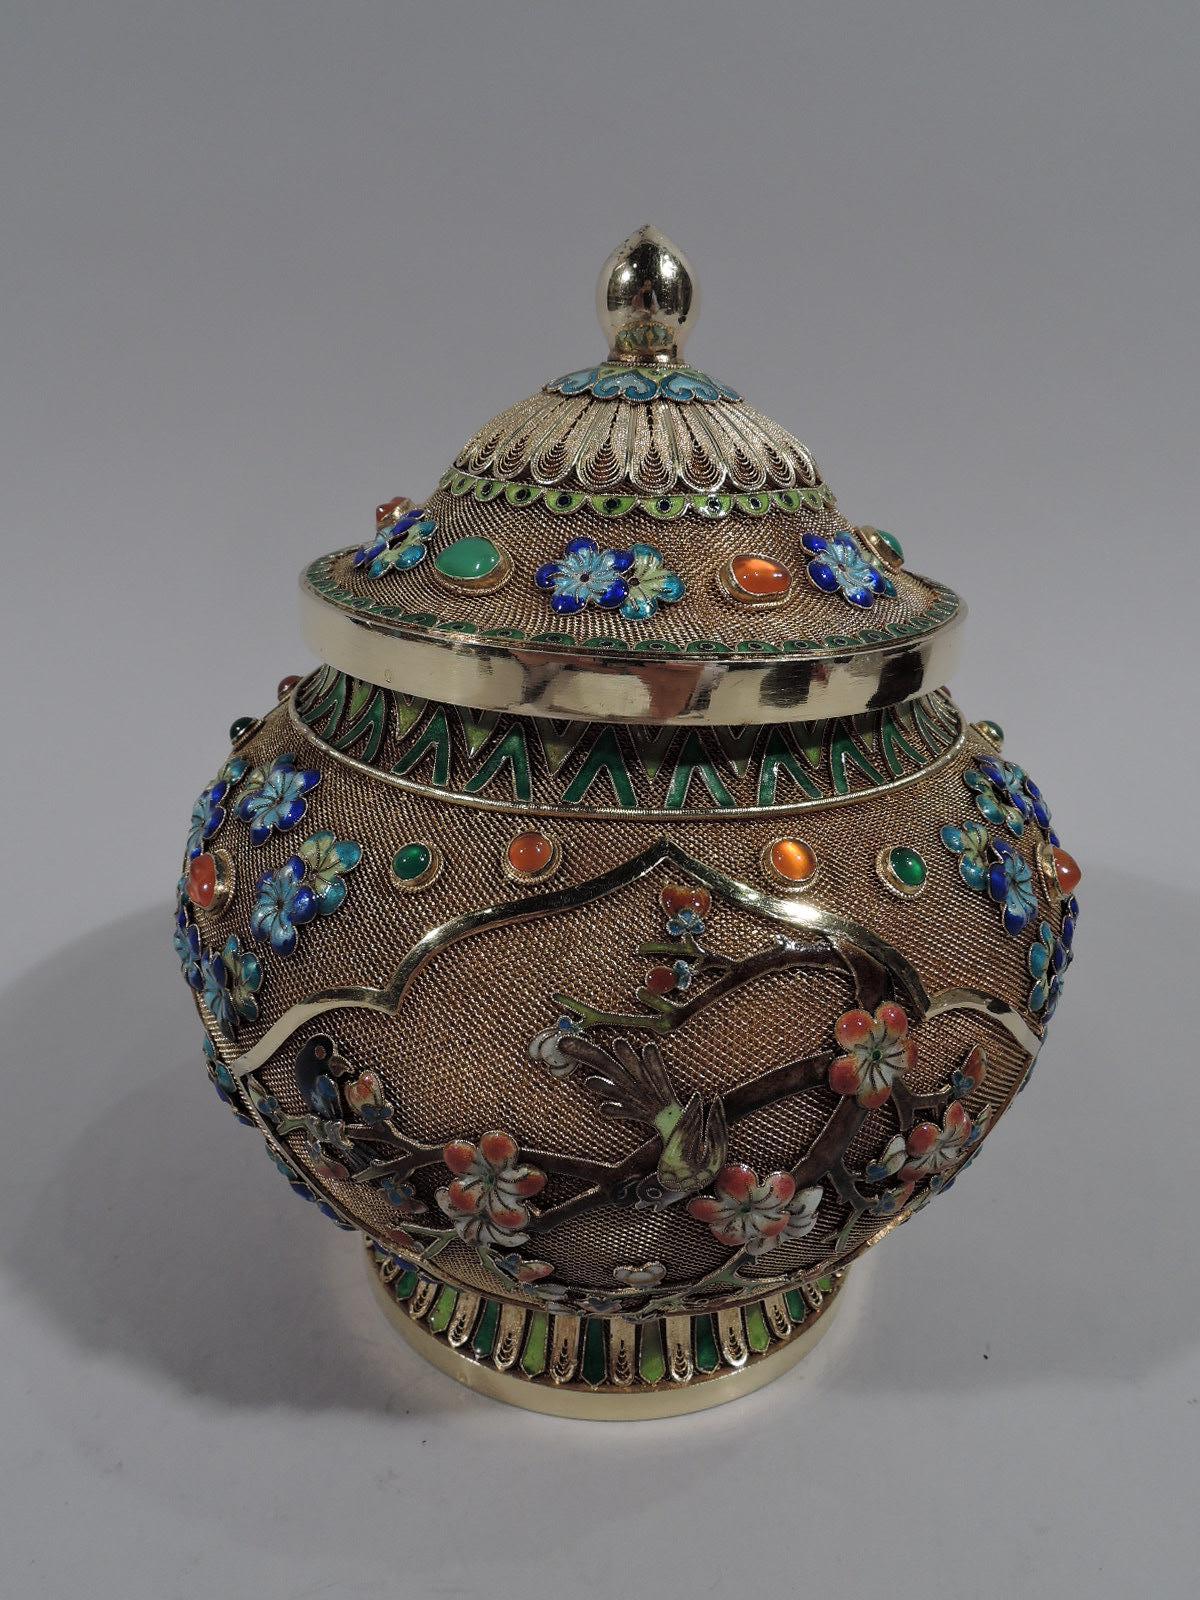 Qing Fabulous Antique Chinese Silver Gilt and Enamel Covered Ginger Jar